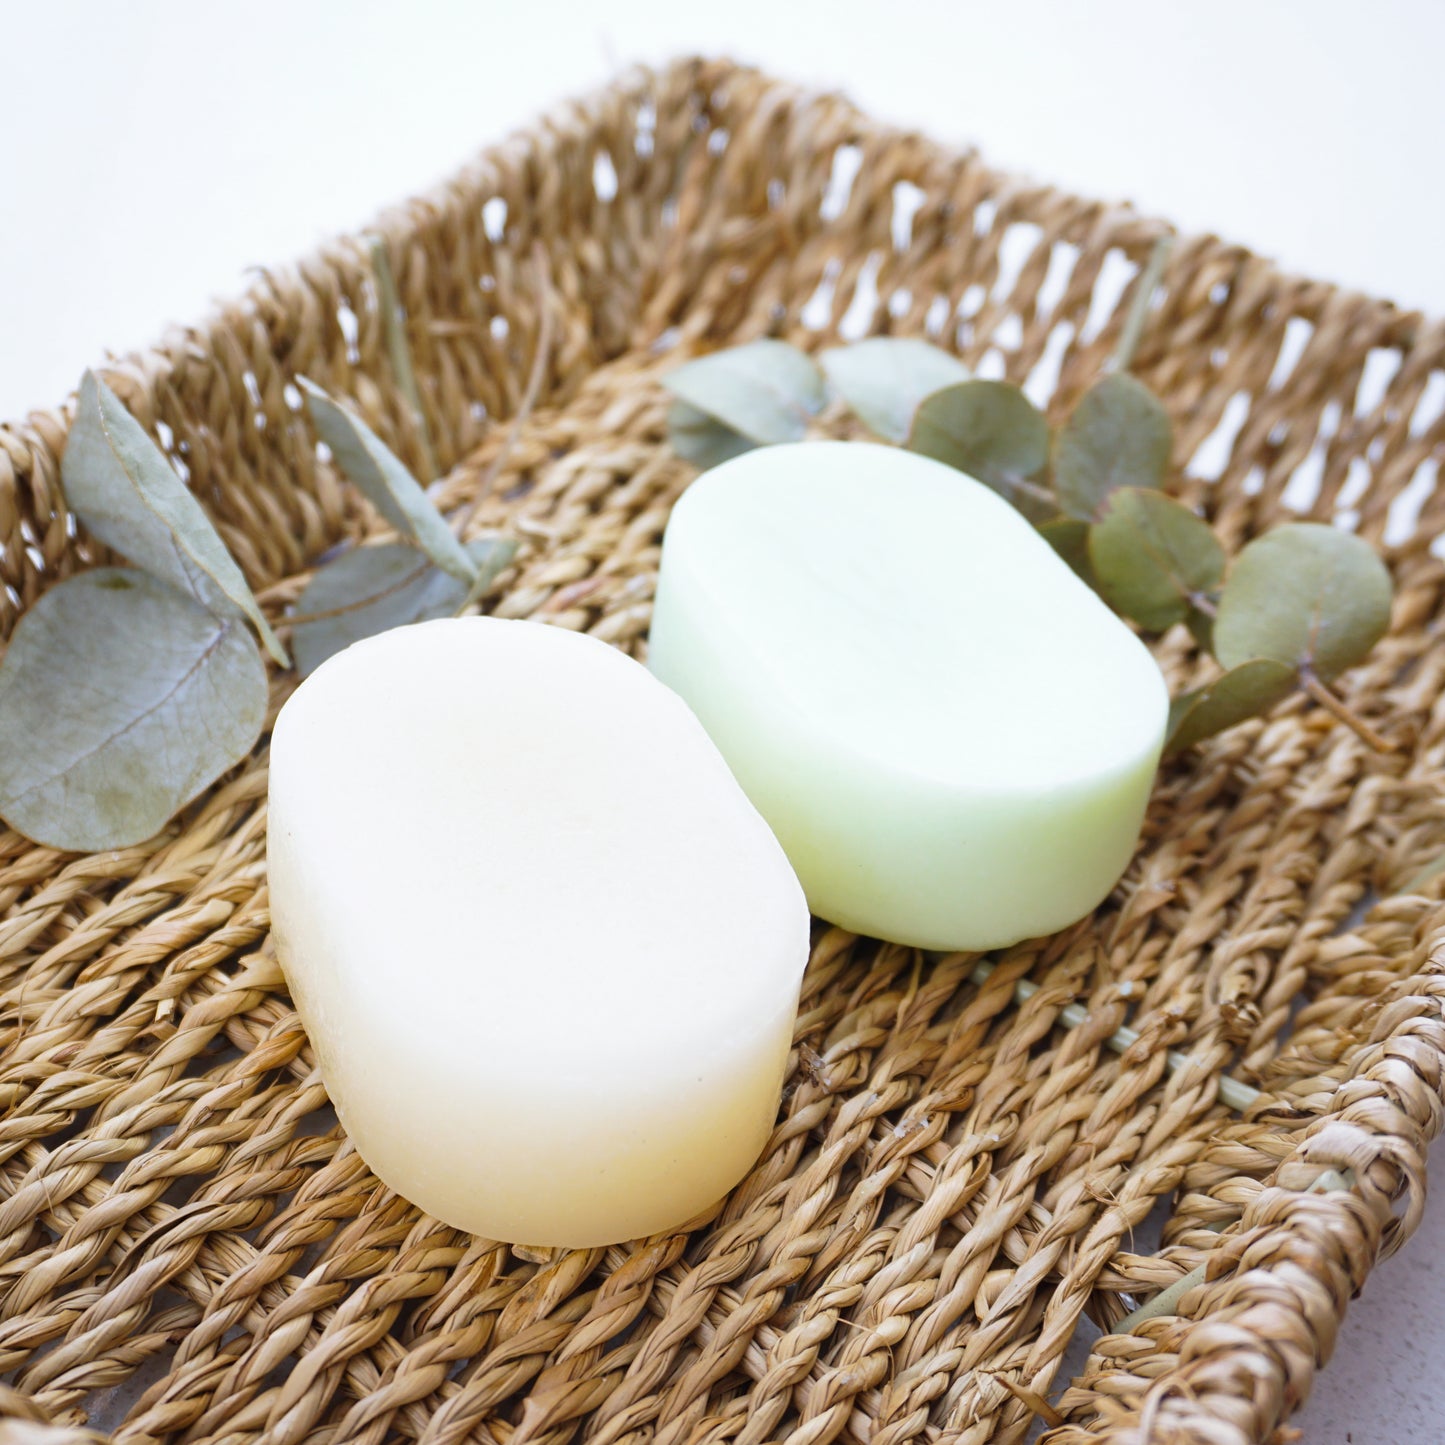 eucalyptus shampoo and conditioner bars on hamper basket surrounded by eucalyptus plants